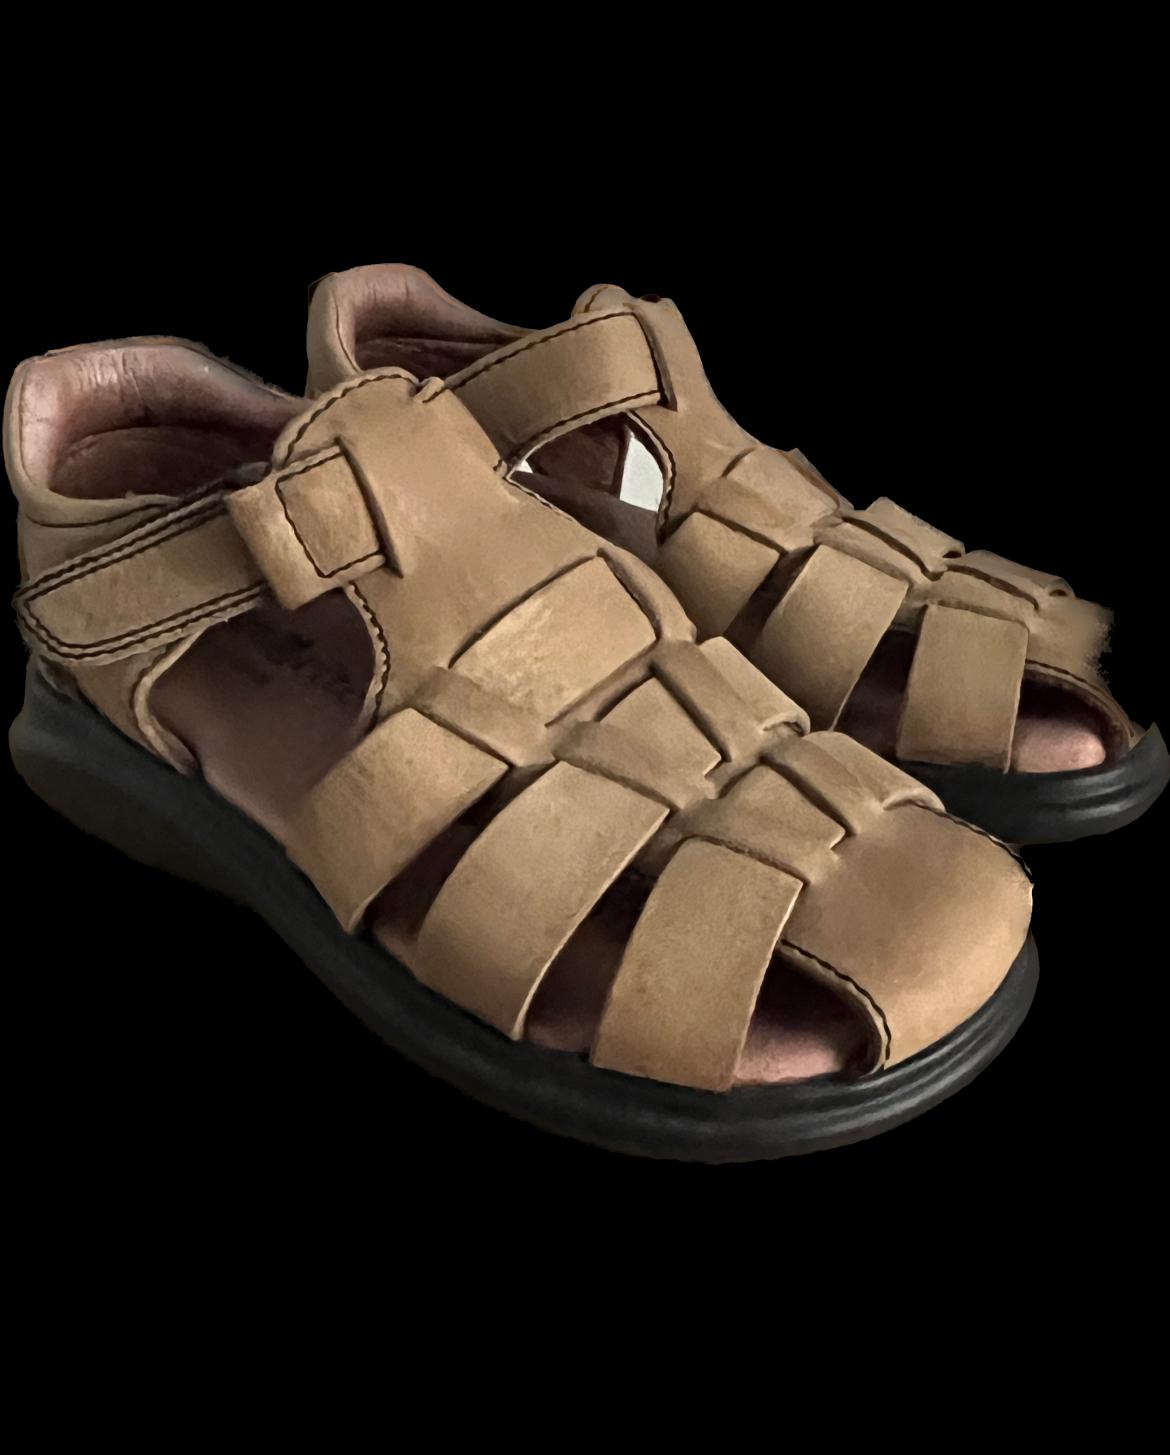 Start-Rite Brown Leather  Hopsack Boys Sandals size UK31F  NEW in box